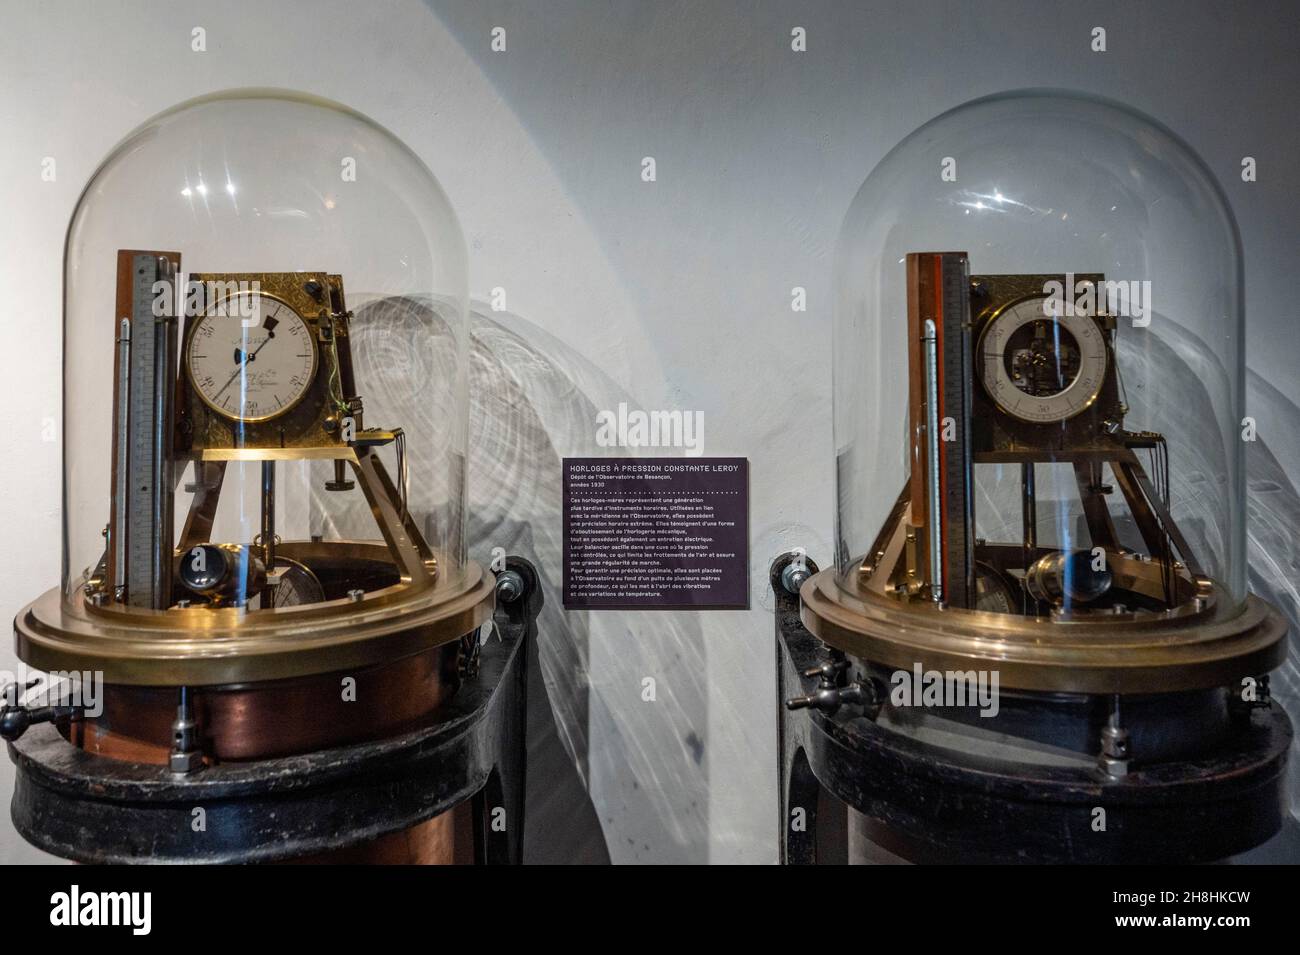 France, Doubs, Besancon, Granvelle museum, exhibition space of the time museum, Leroy constant pressure clock Stock Photo